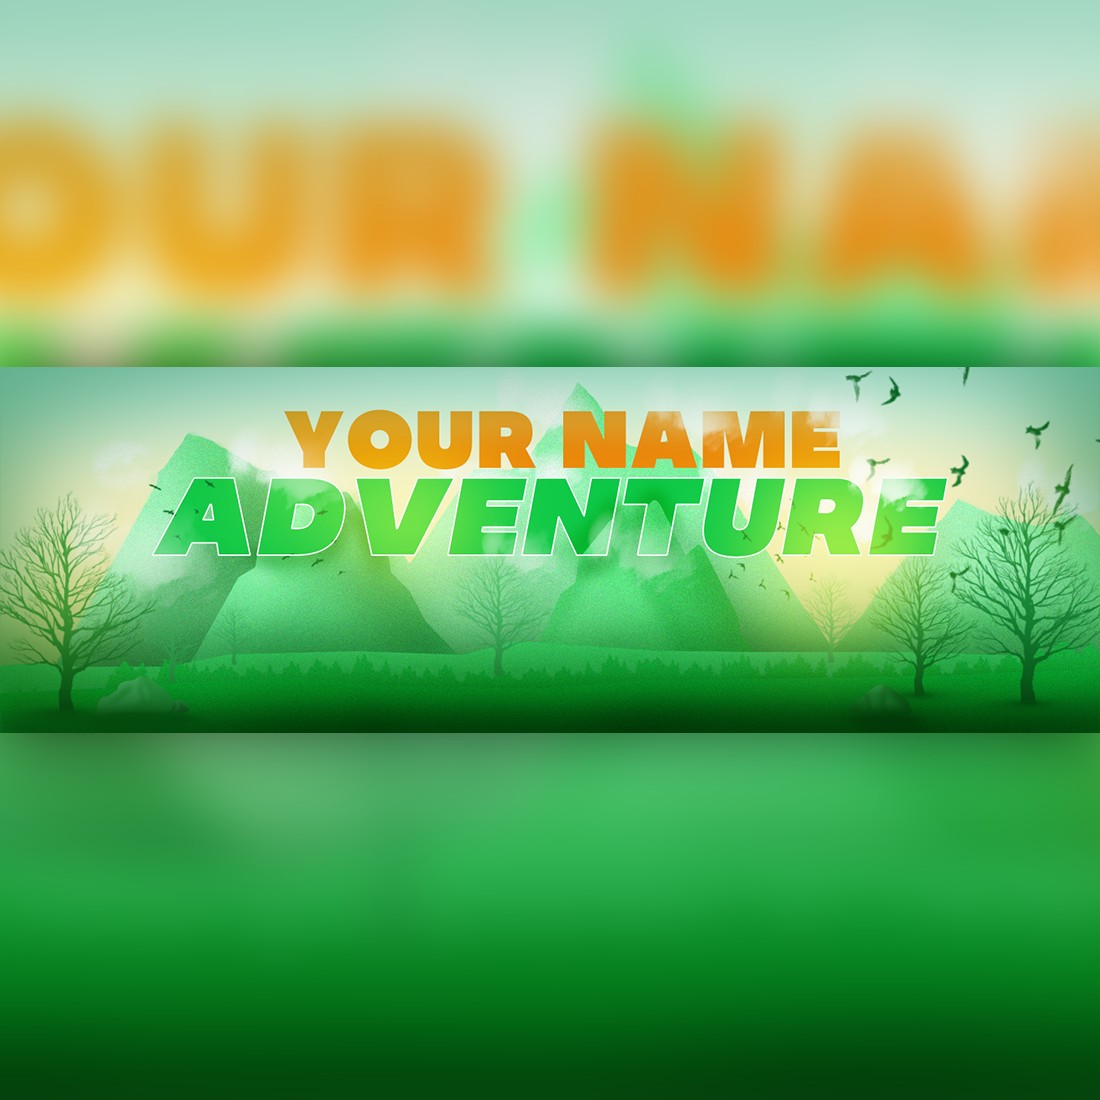 Twitter Banner Template (High Quality Adventure Banner) cover image.